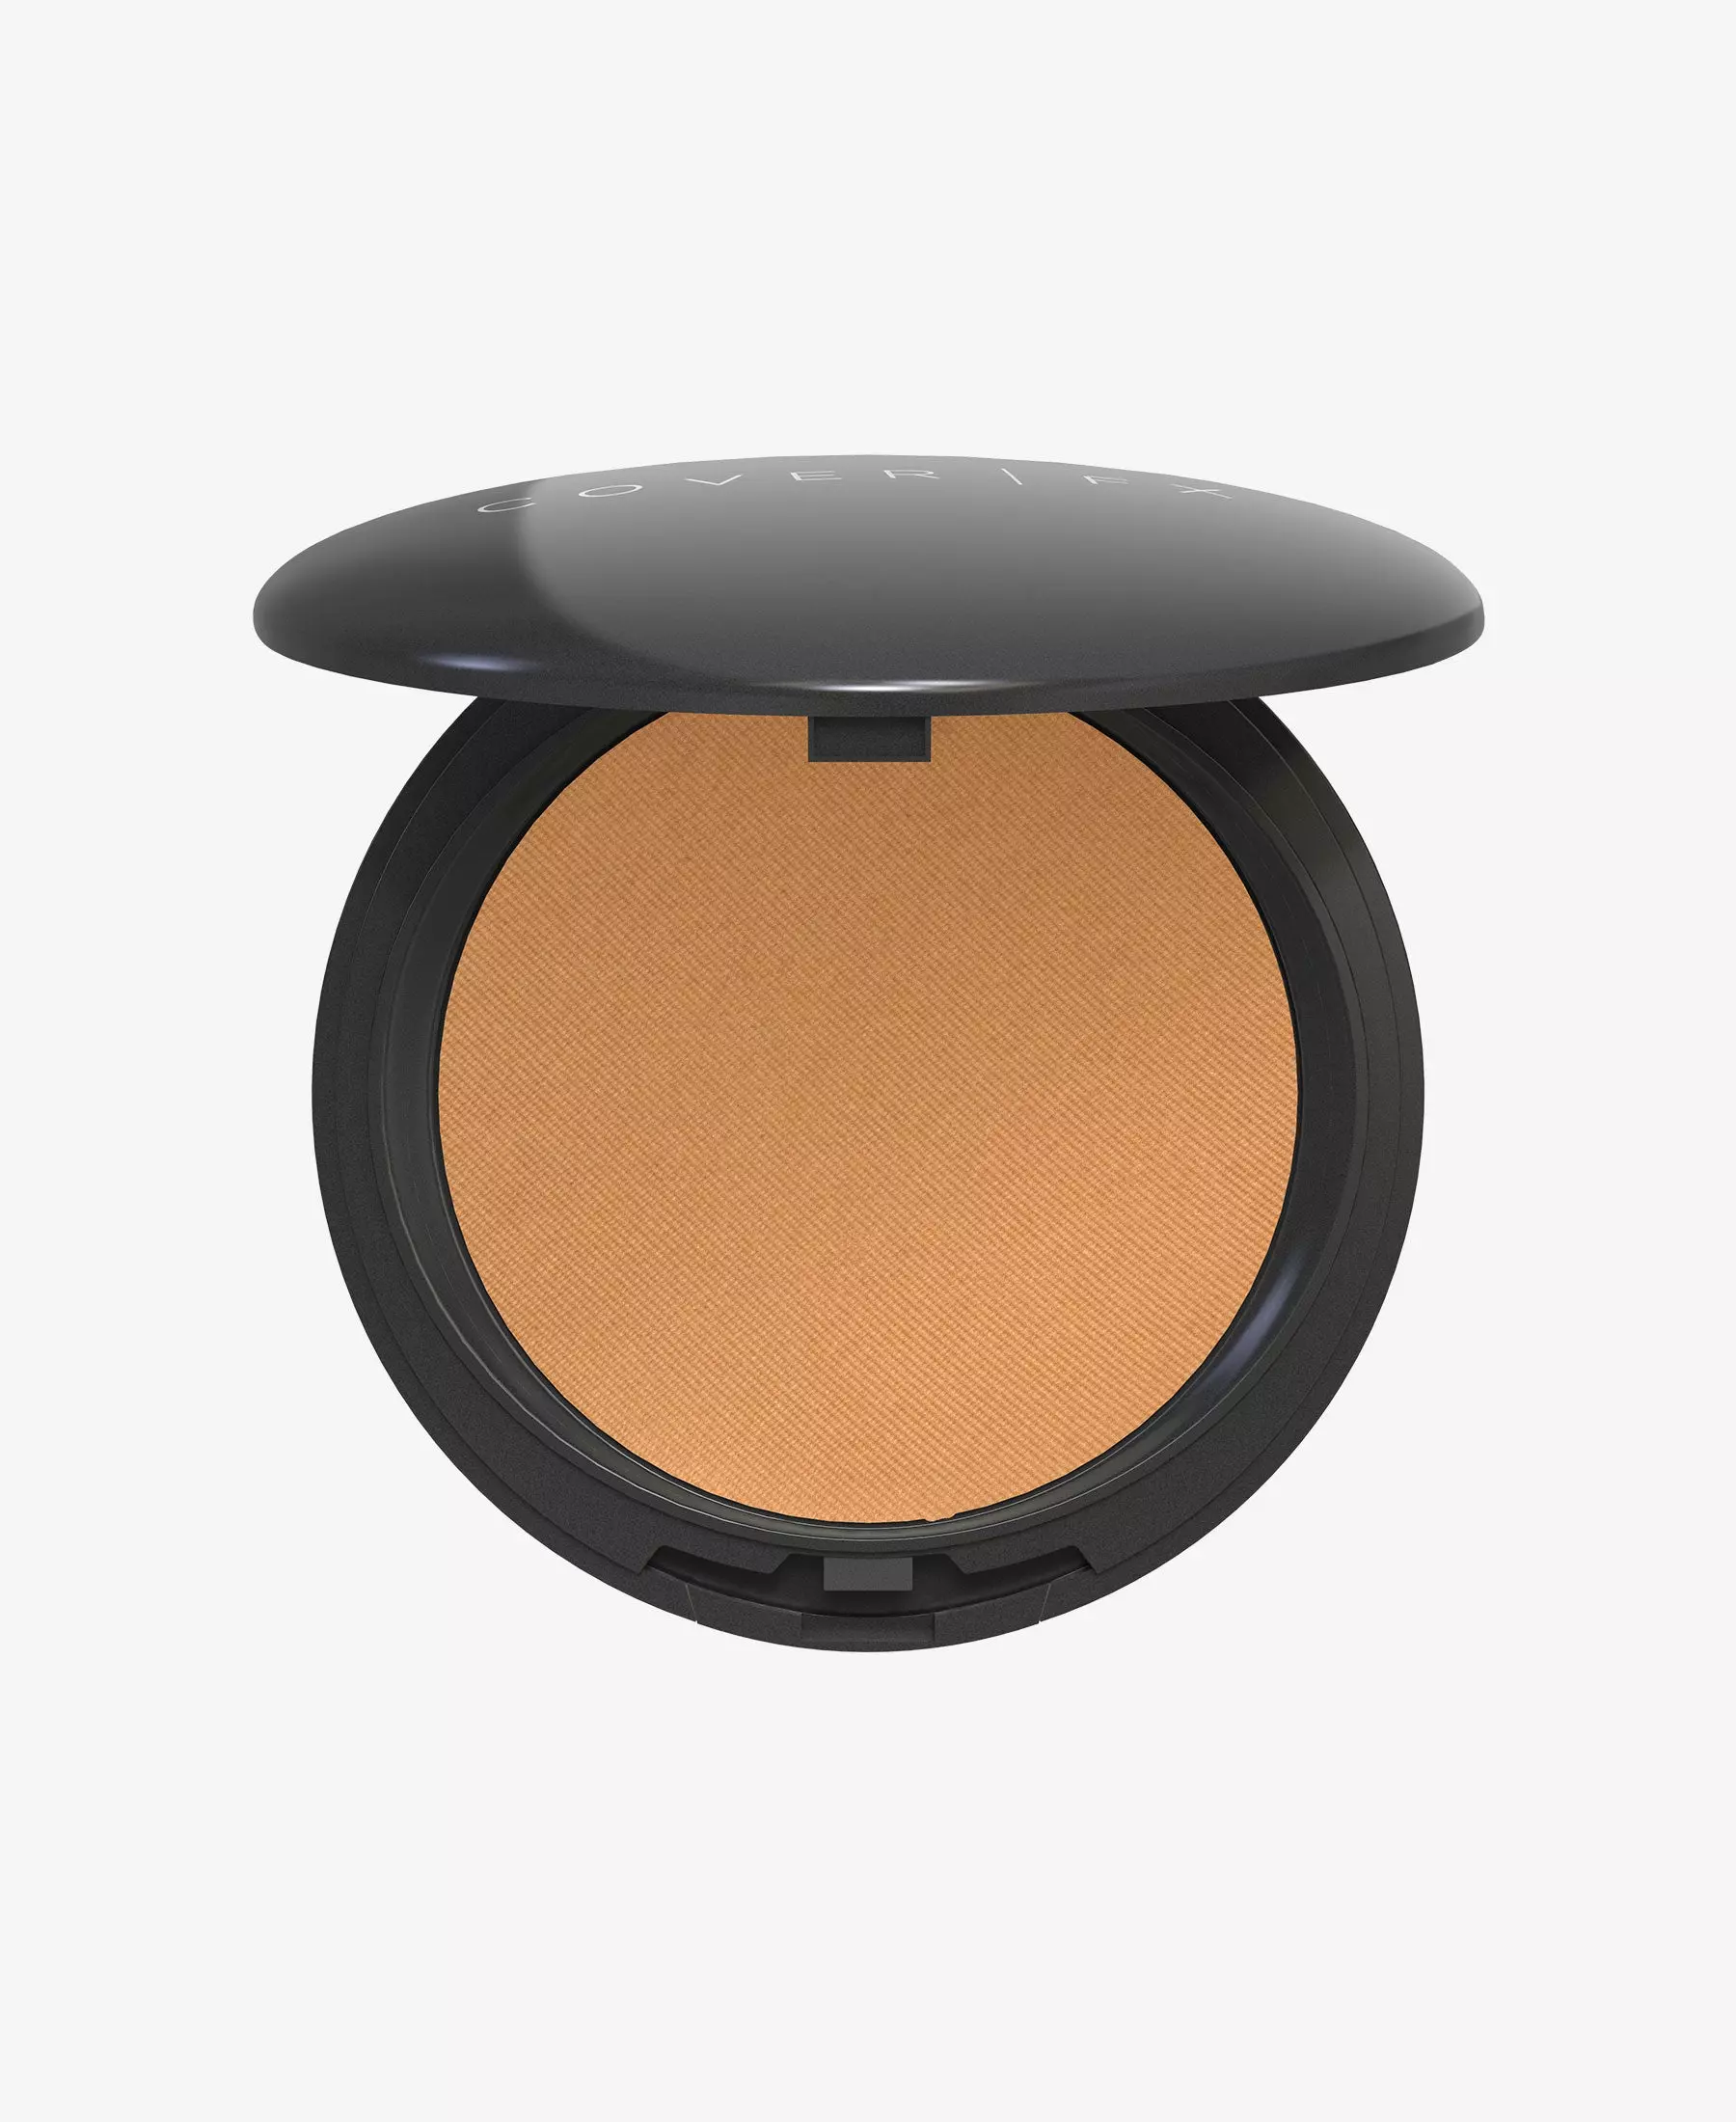 COVER FX Pressed Mineral Foundation 